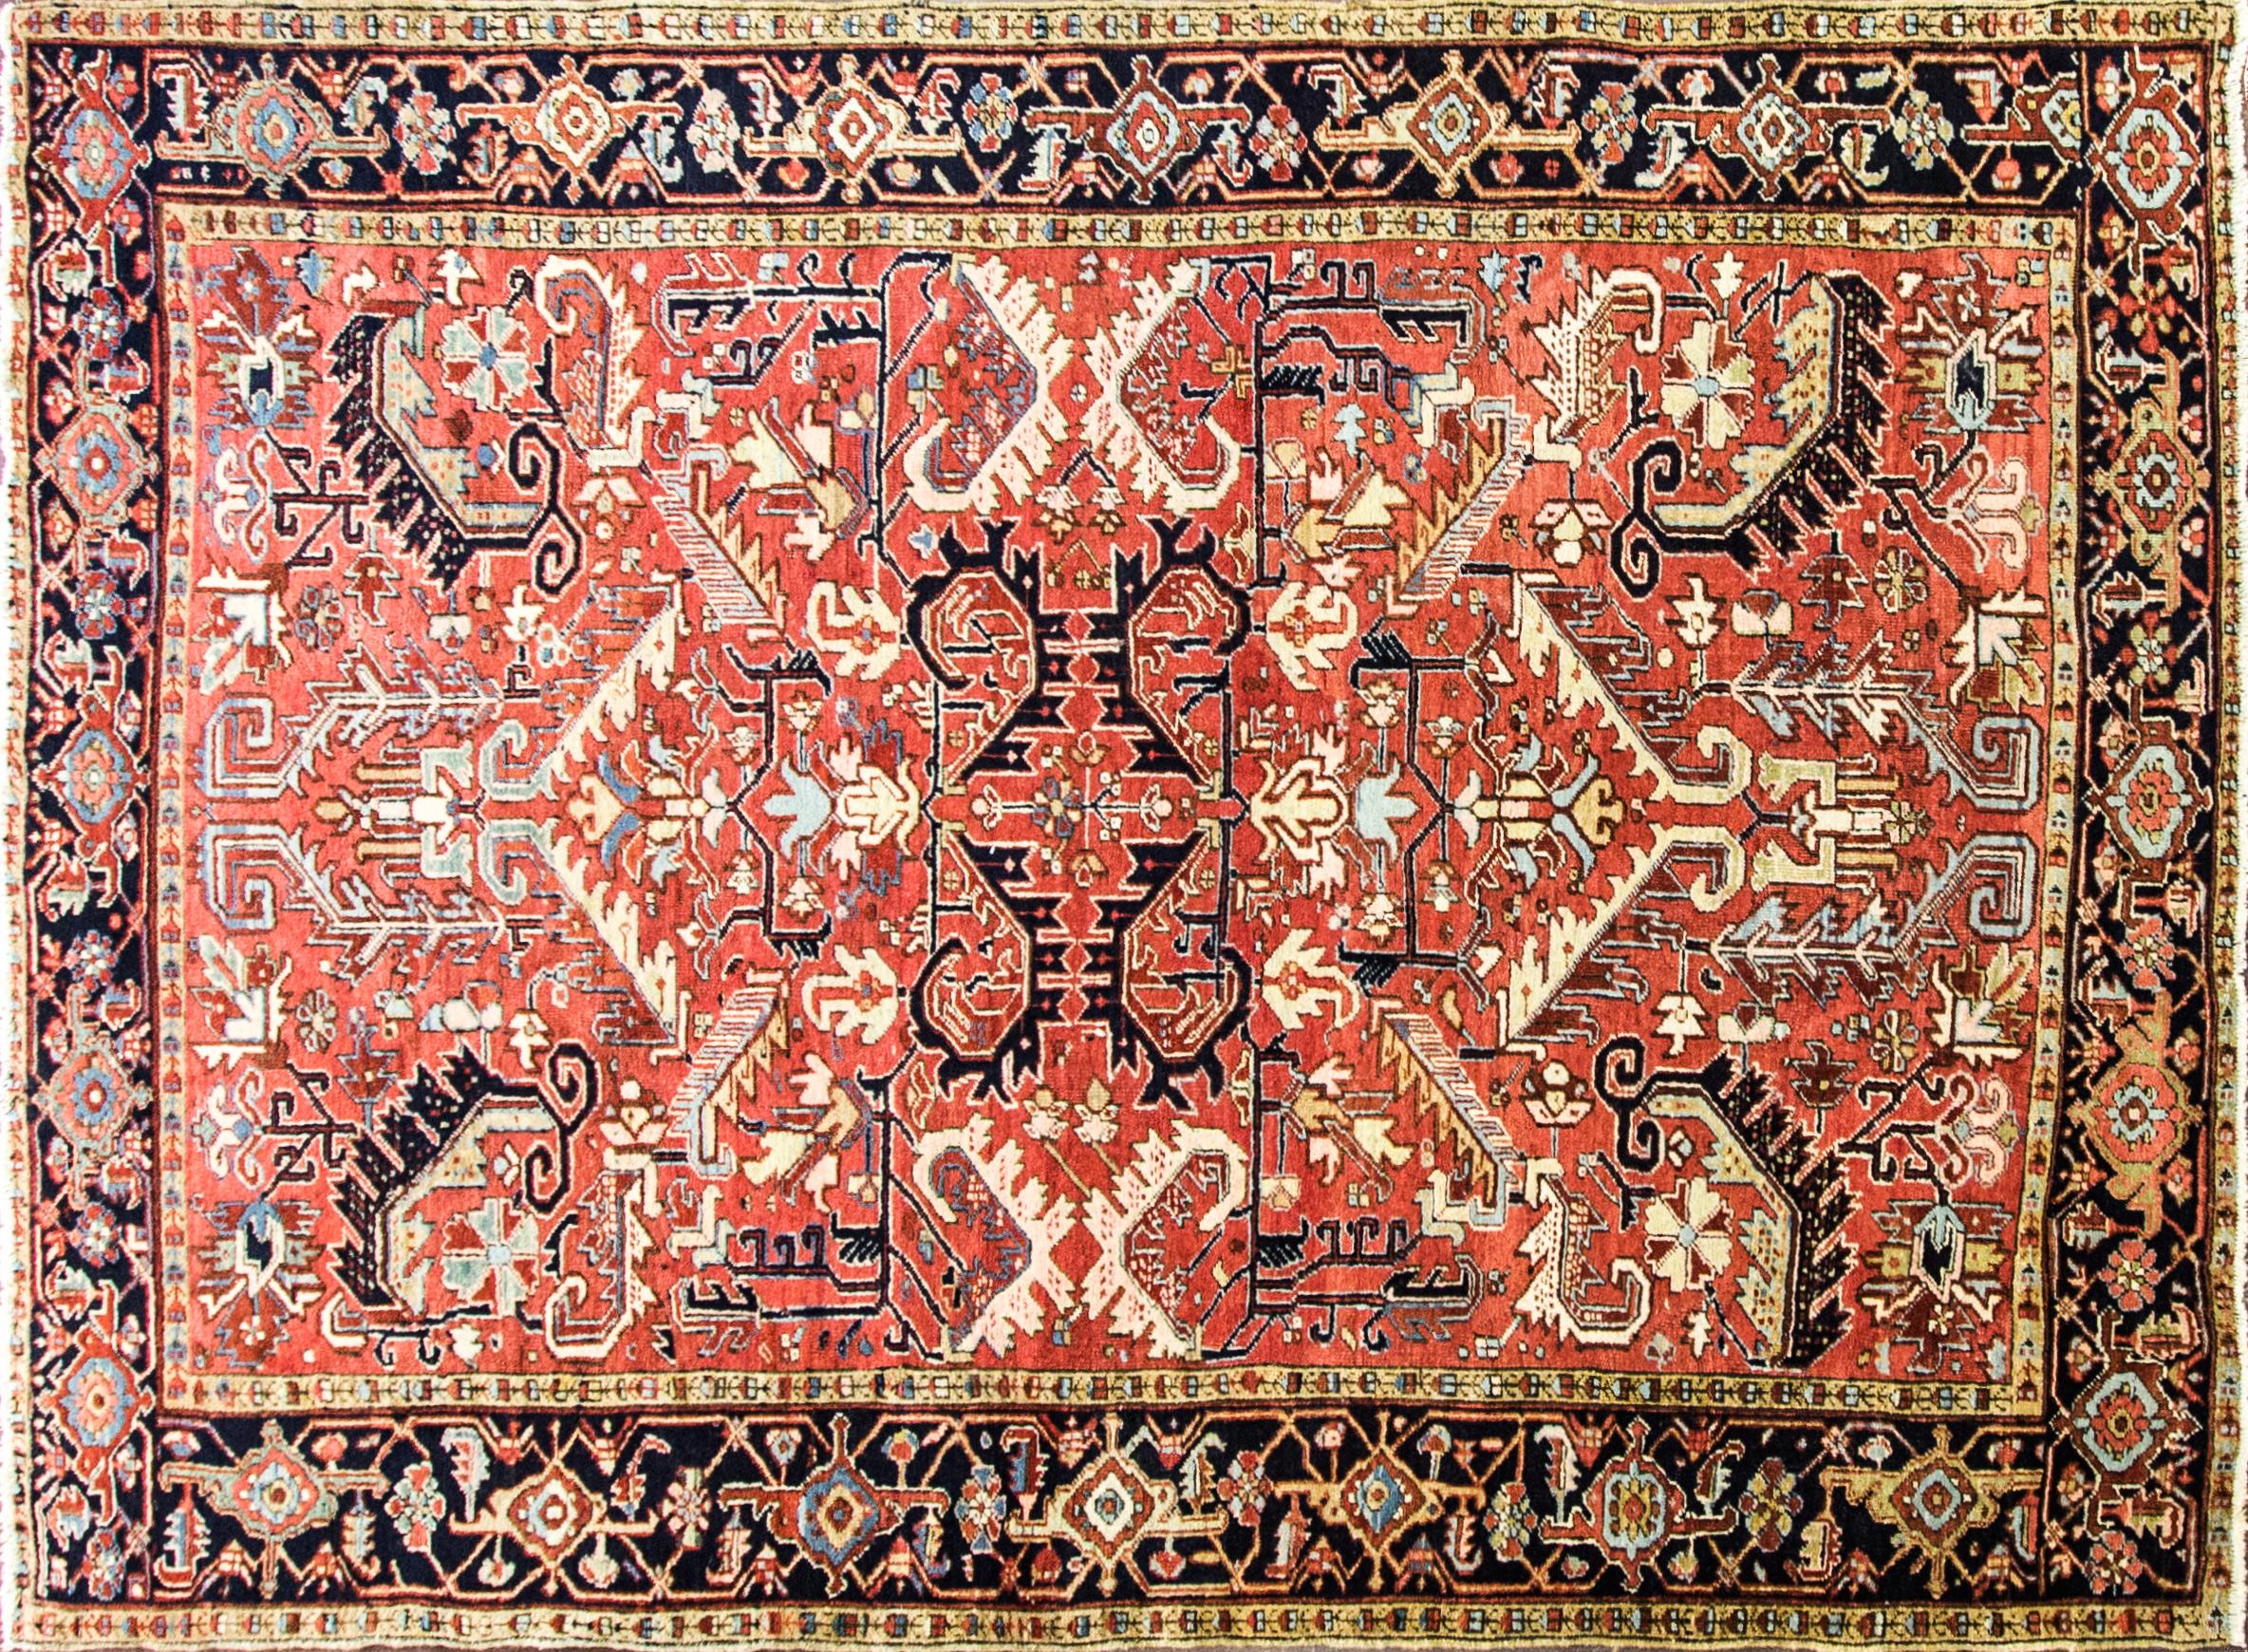 This remarkable and artistic antique rug showcases an ornate, multicolored central design. At the heart of the antique Persian Heriz Serapi rug, a many-petaled flower is surrounded by a 12-pointed stellar shape in light and dark blue. Angular